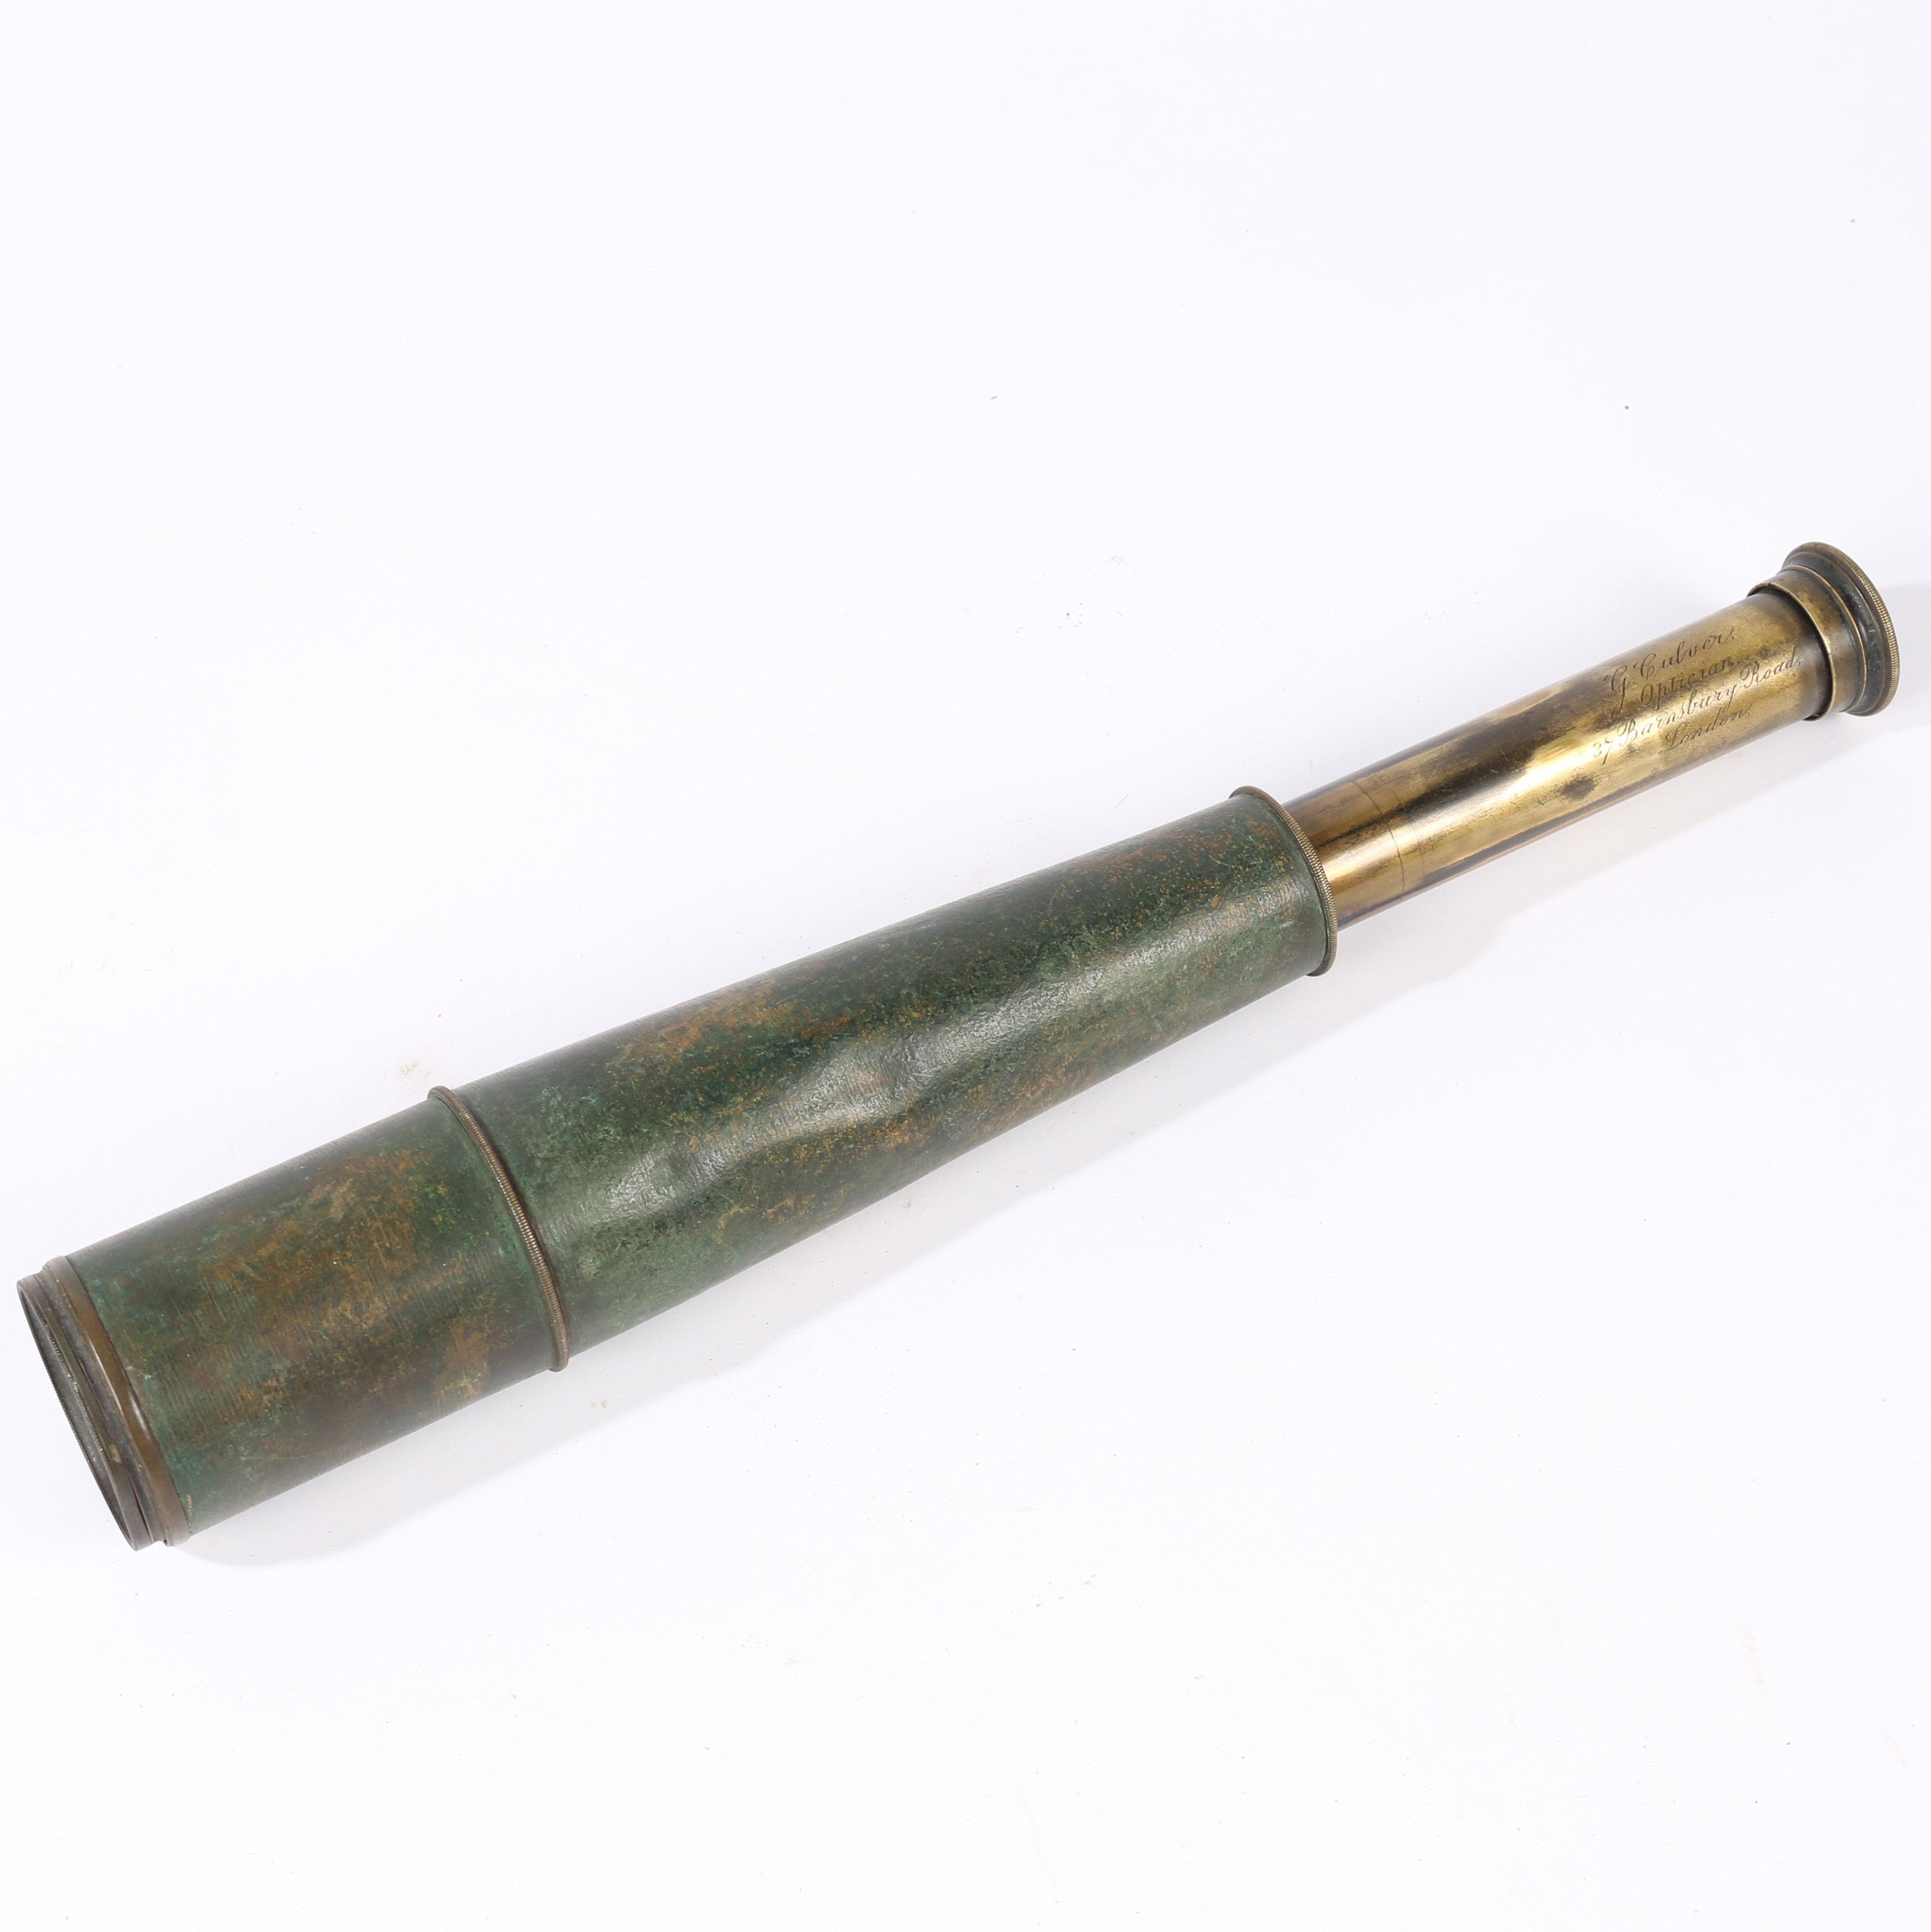 A VICTORIAN SINGLE DRAW TELESCOPE BY G. CULVER OPTICIAN OF LONDON.